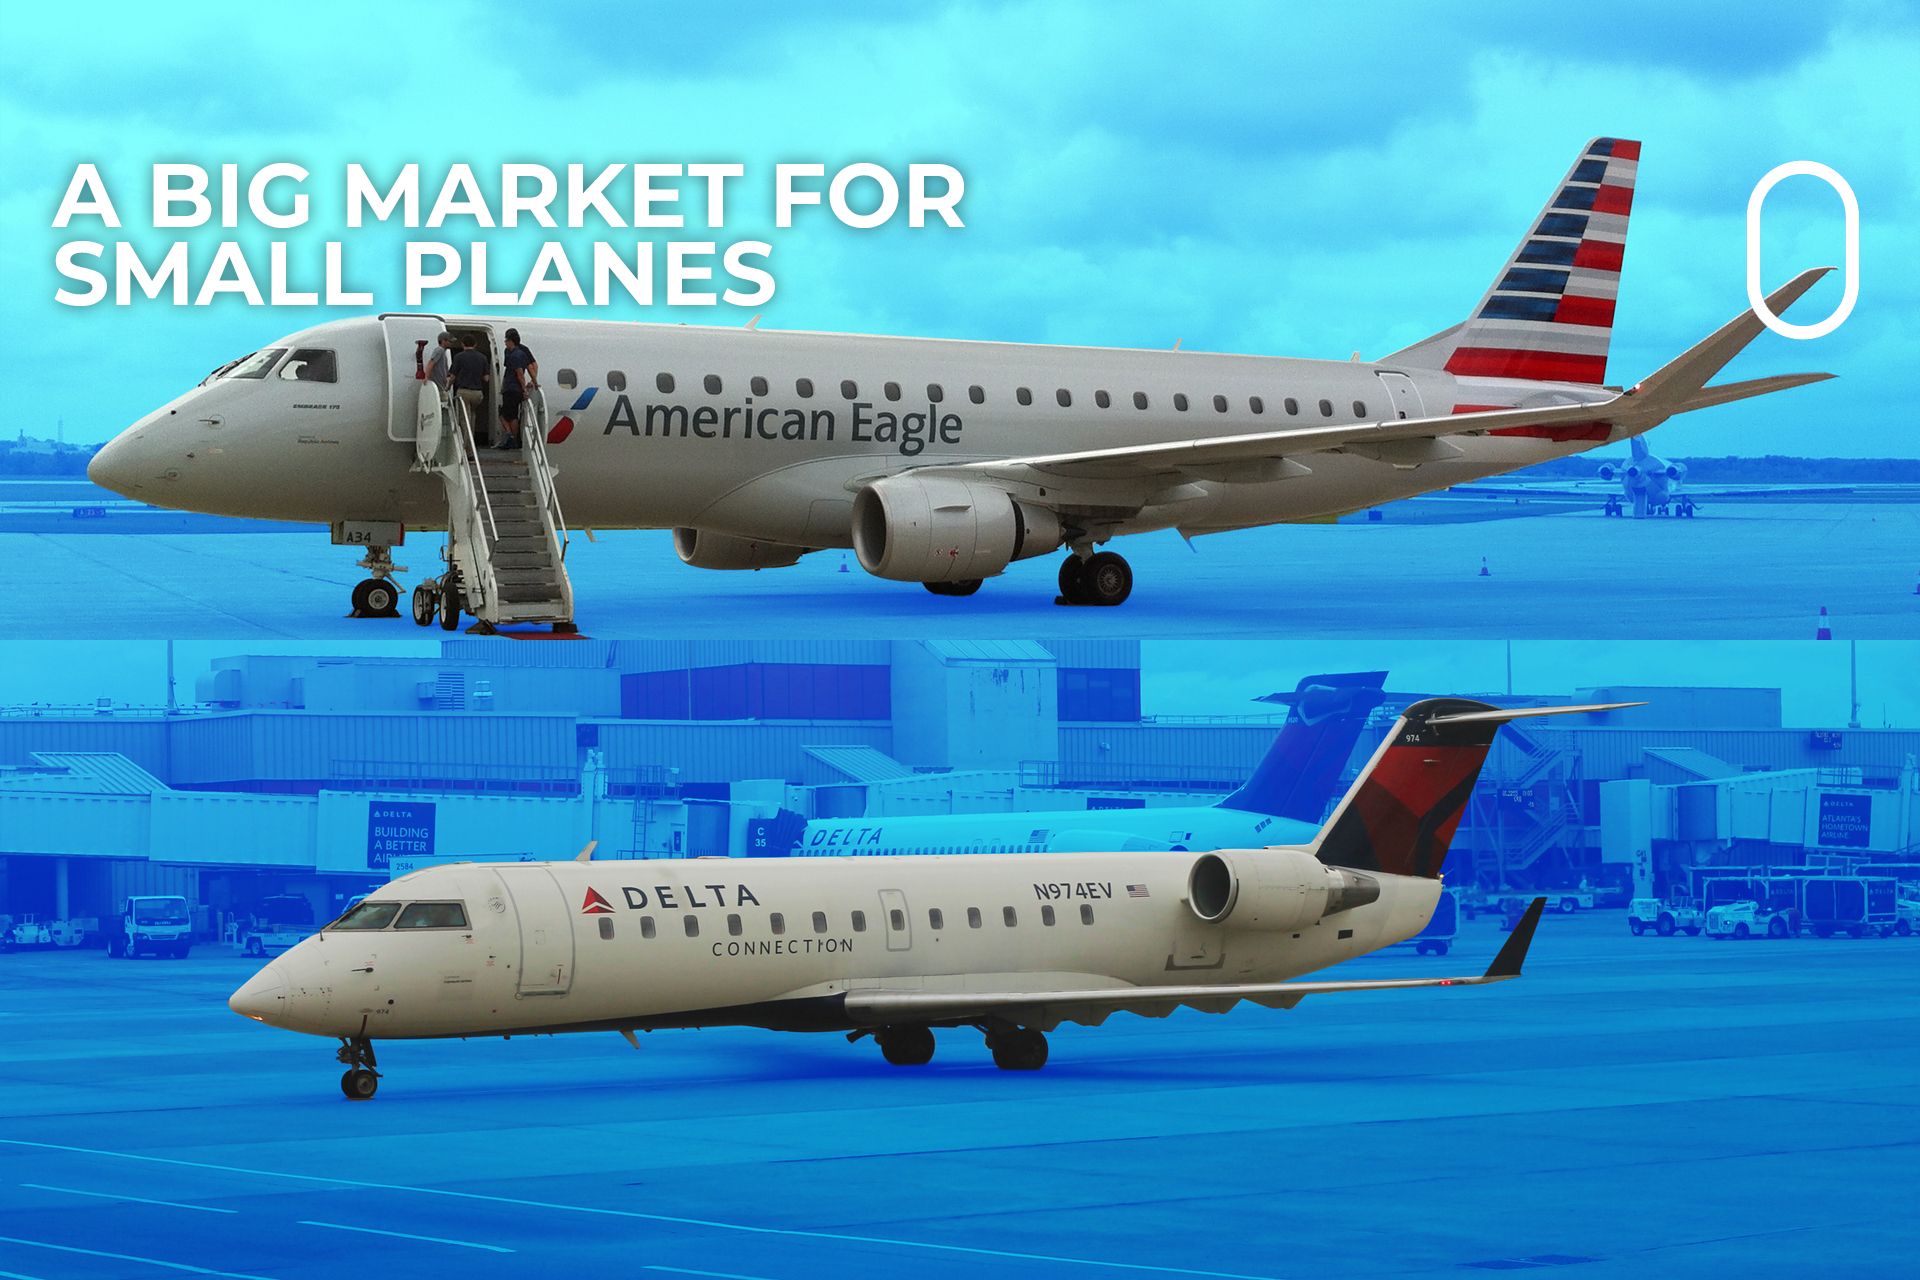 Why Are Regional Jets So Popular In The US?